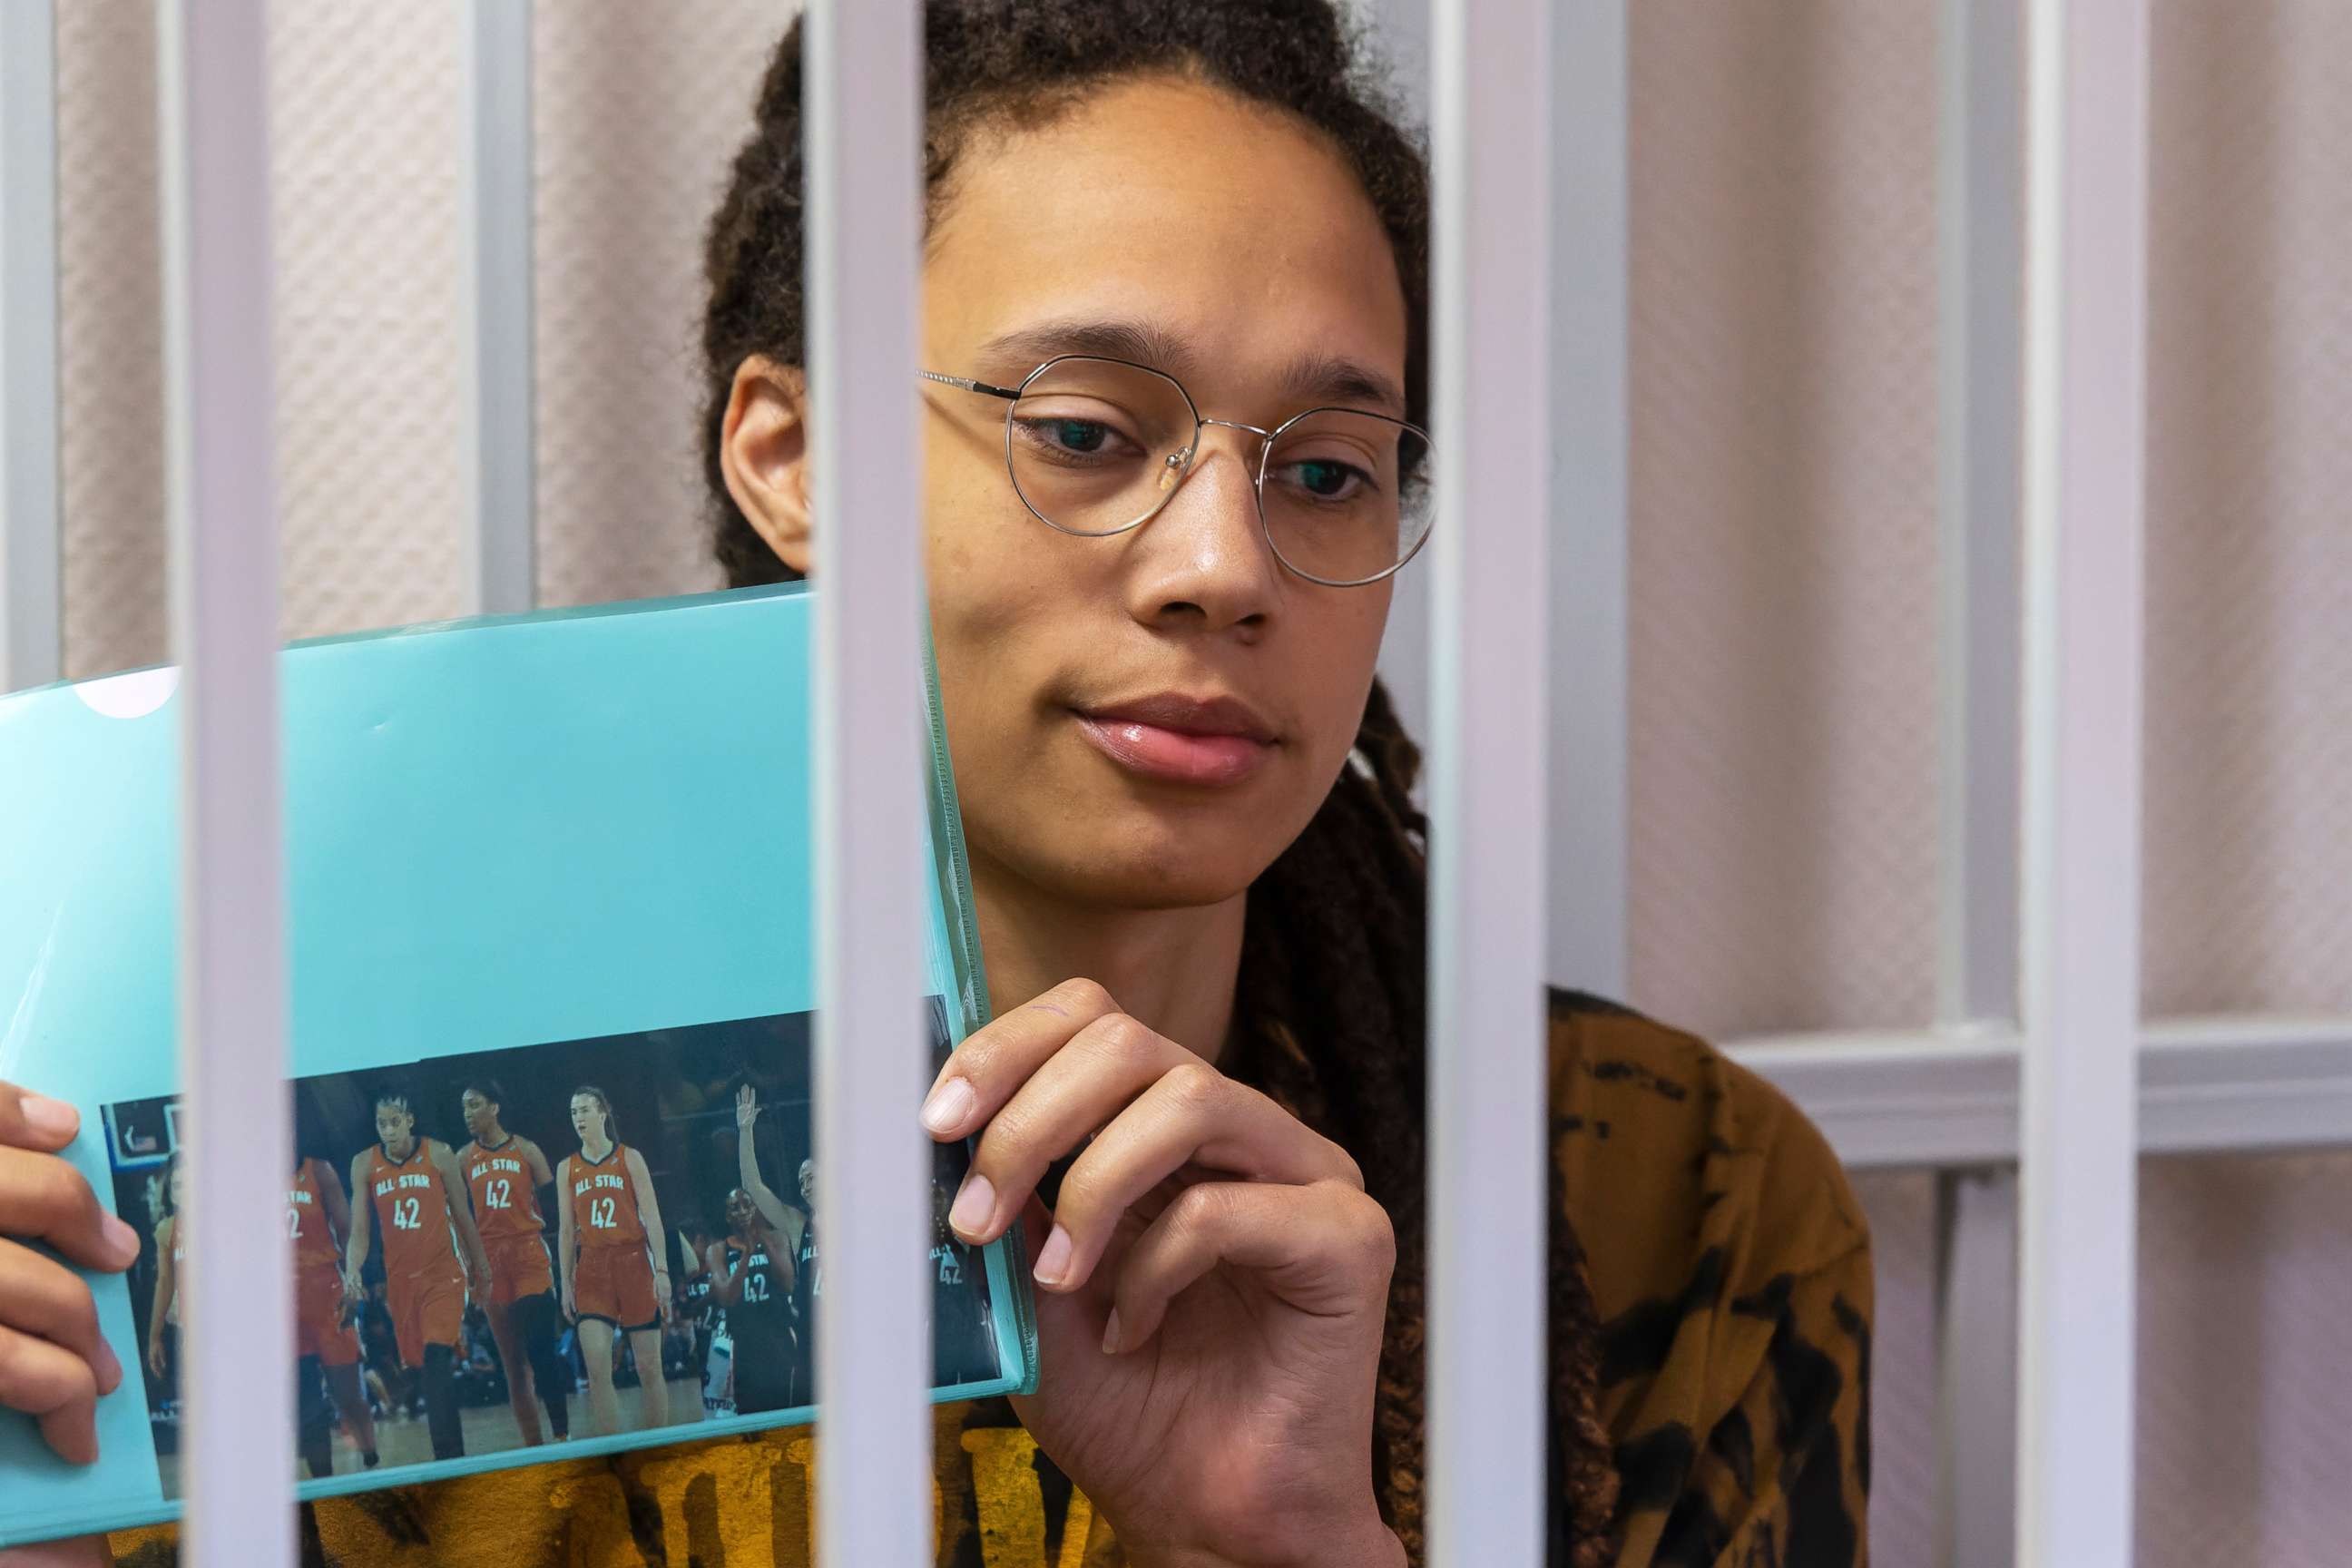 PHOTO: WNBA star and two-time Olympic gold medalist Brittney Griner holds up a photo of players from the recent all star game wearing her number, sitting in a cage at a court room prior to a hearing in the Khimki district court, July 15, 2022.